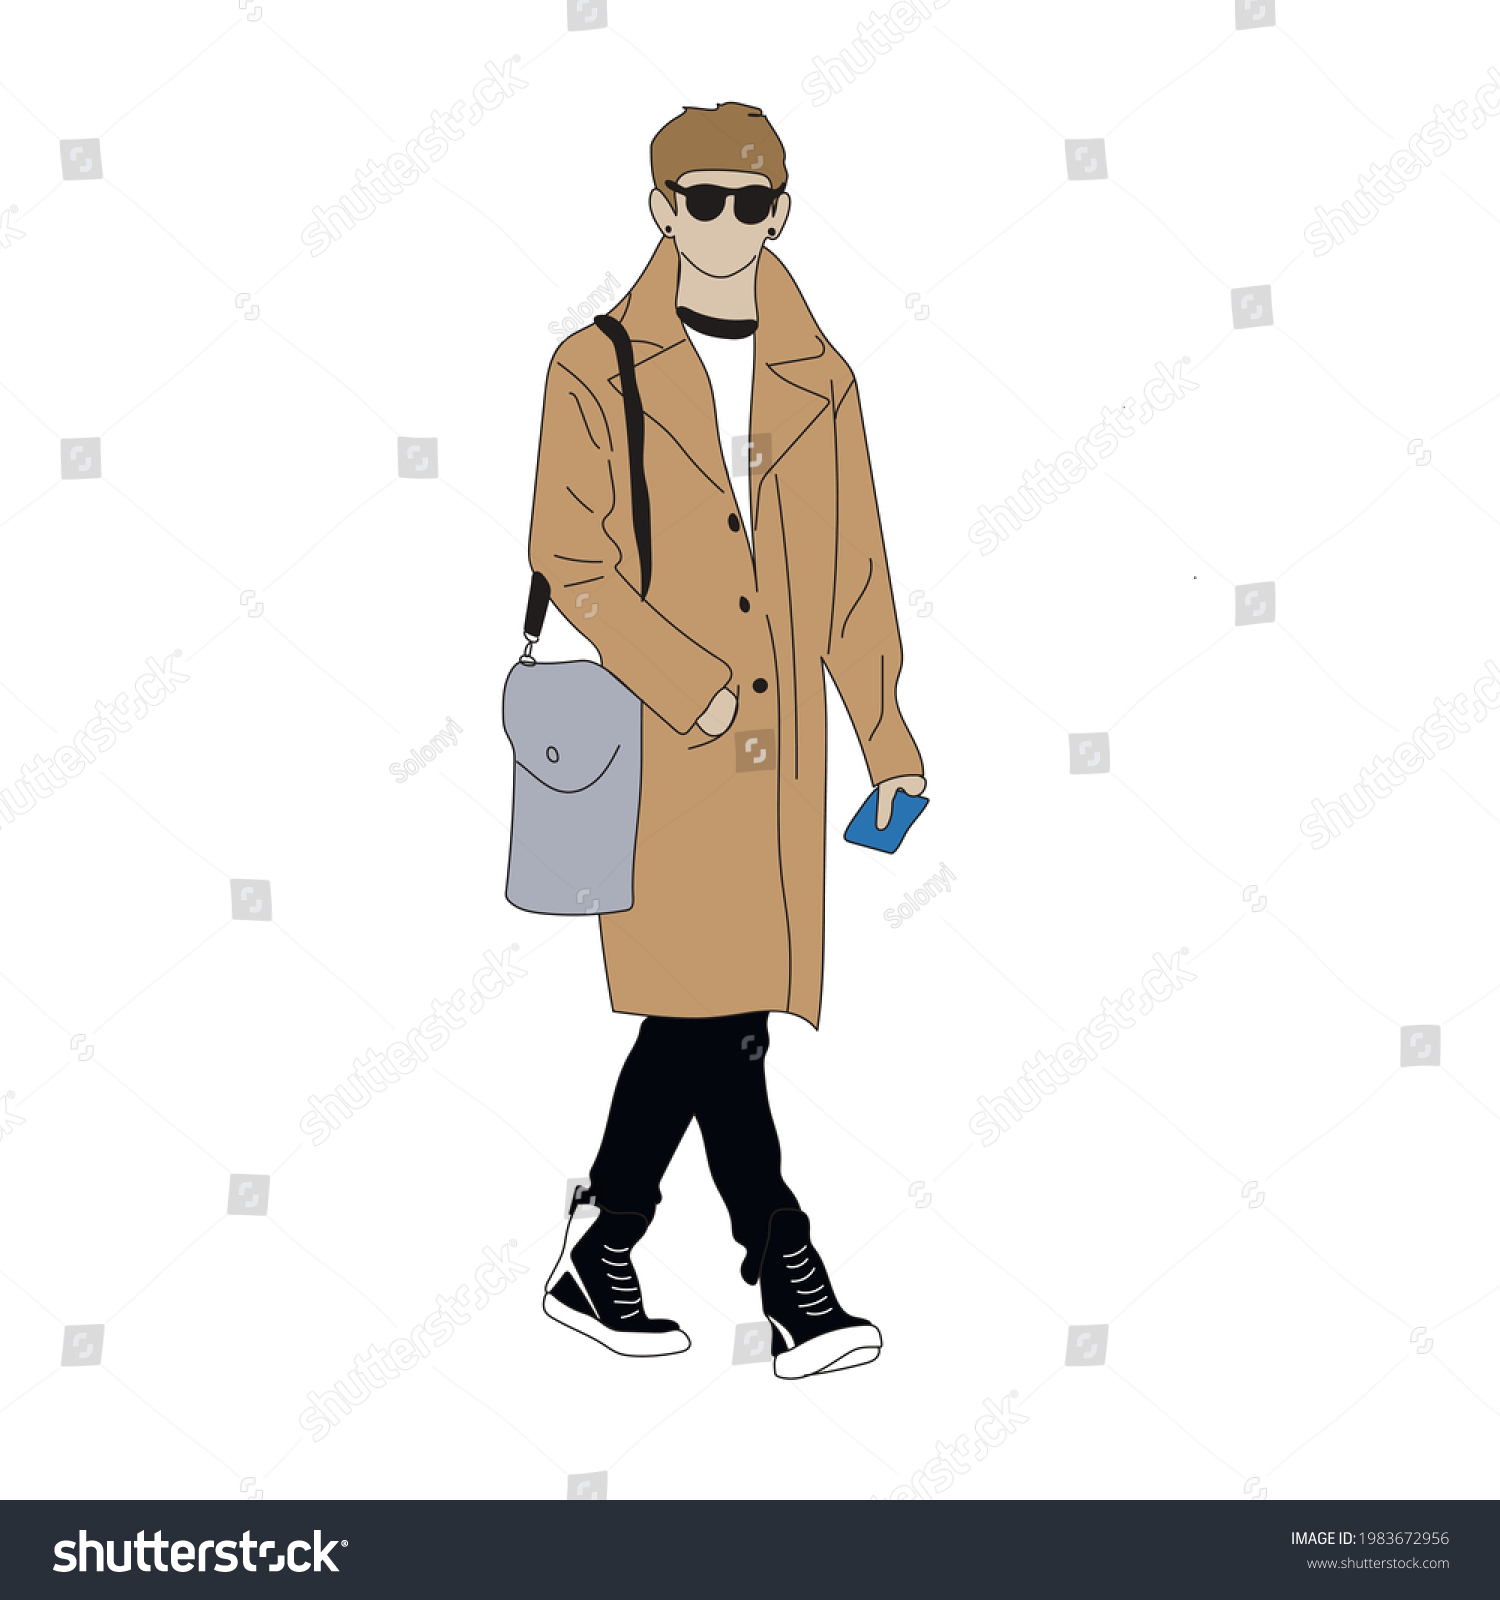 SVG of Vector illustration of Kpop street fashion. Street idols of Koreans. Kpop male fashion idol. A guy in a beige coat with black trousers. svg